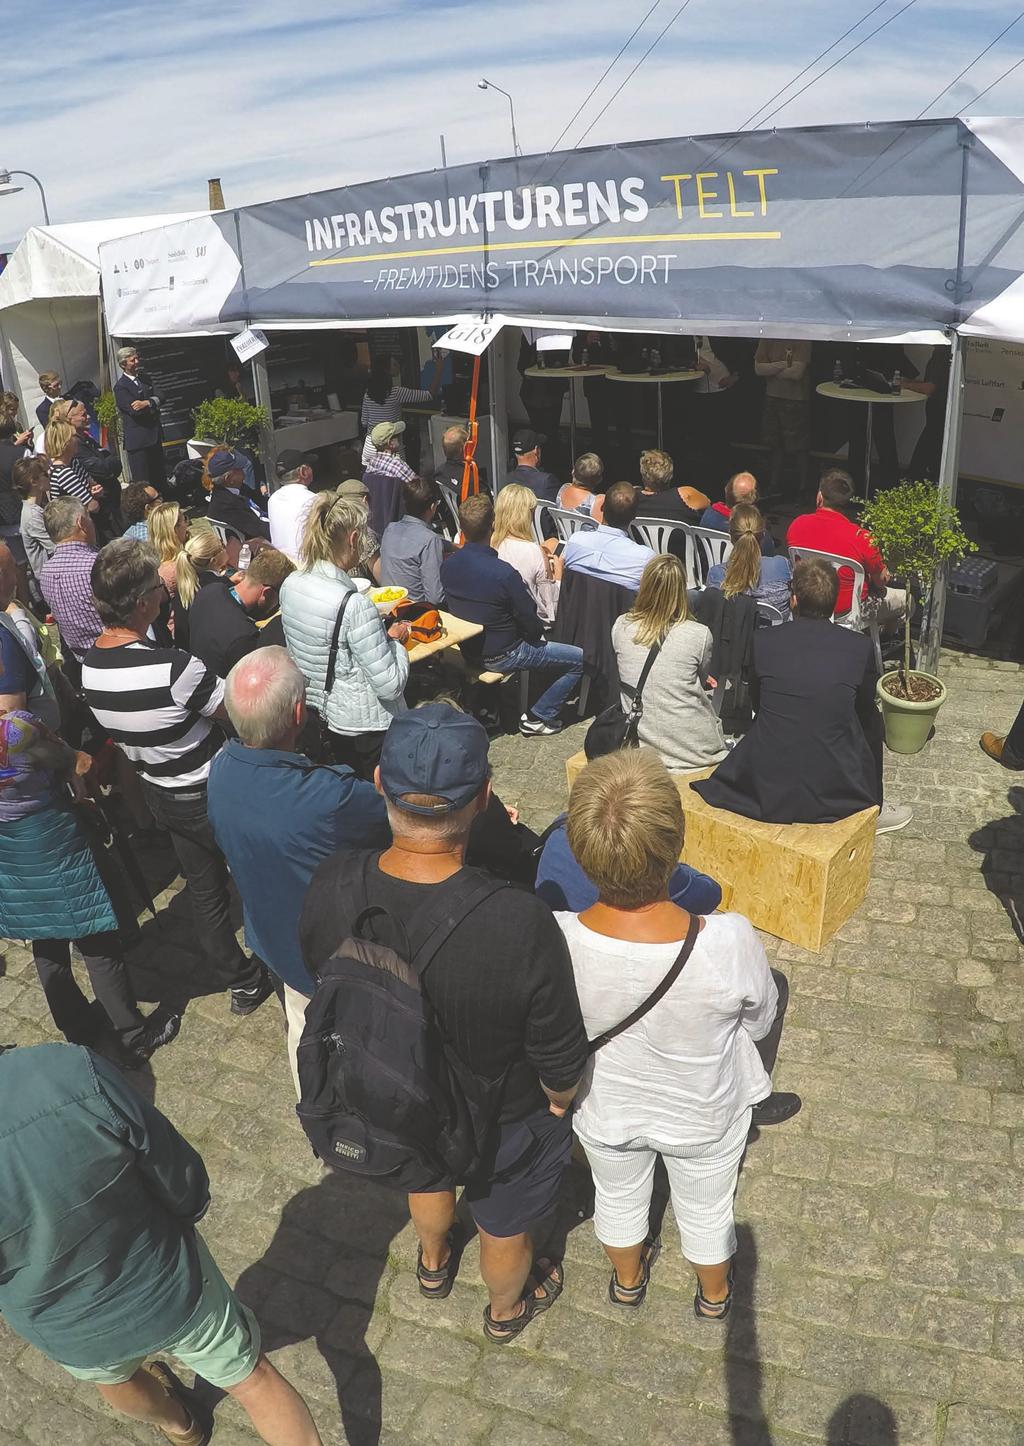 During the Folkemøde (The People s Political Festival) in Allinge on Bornholm this summer, Naviair will be present at the Infrastructure Tent, together with CPH, SAS and DI Transport, among others.